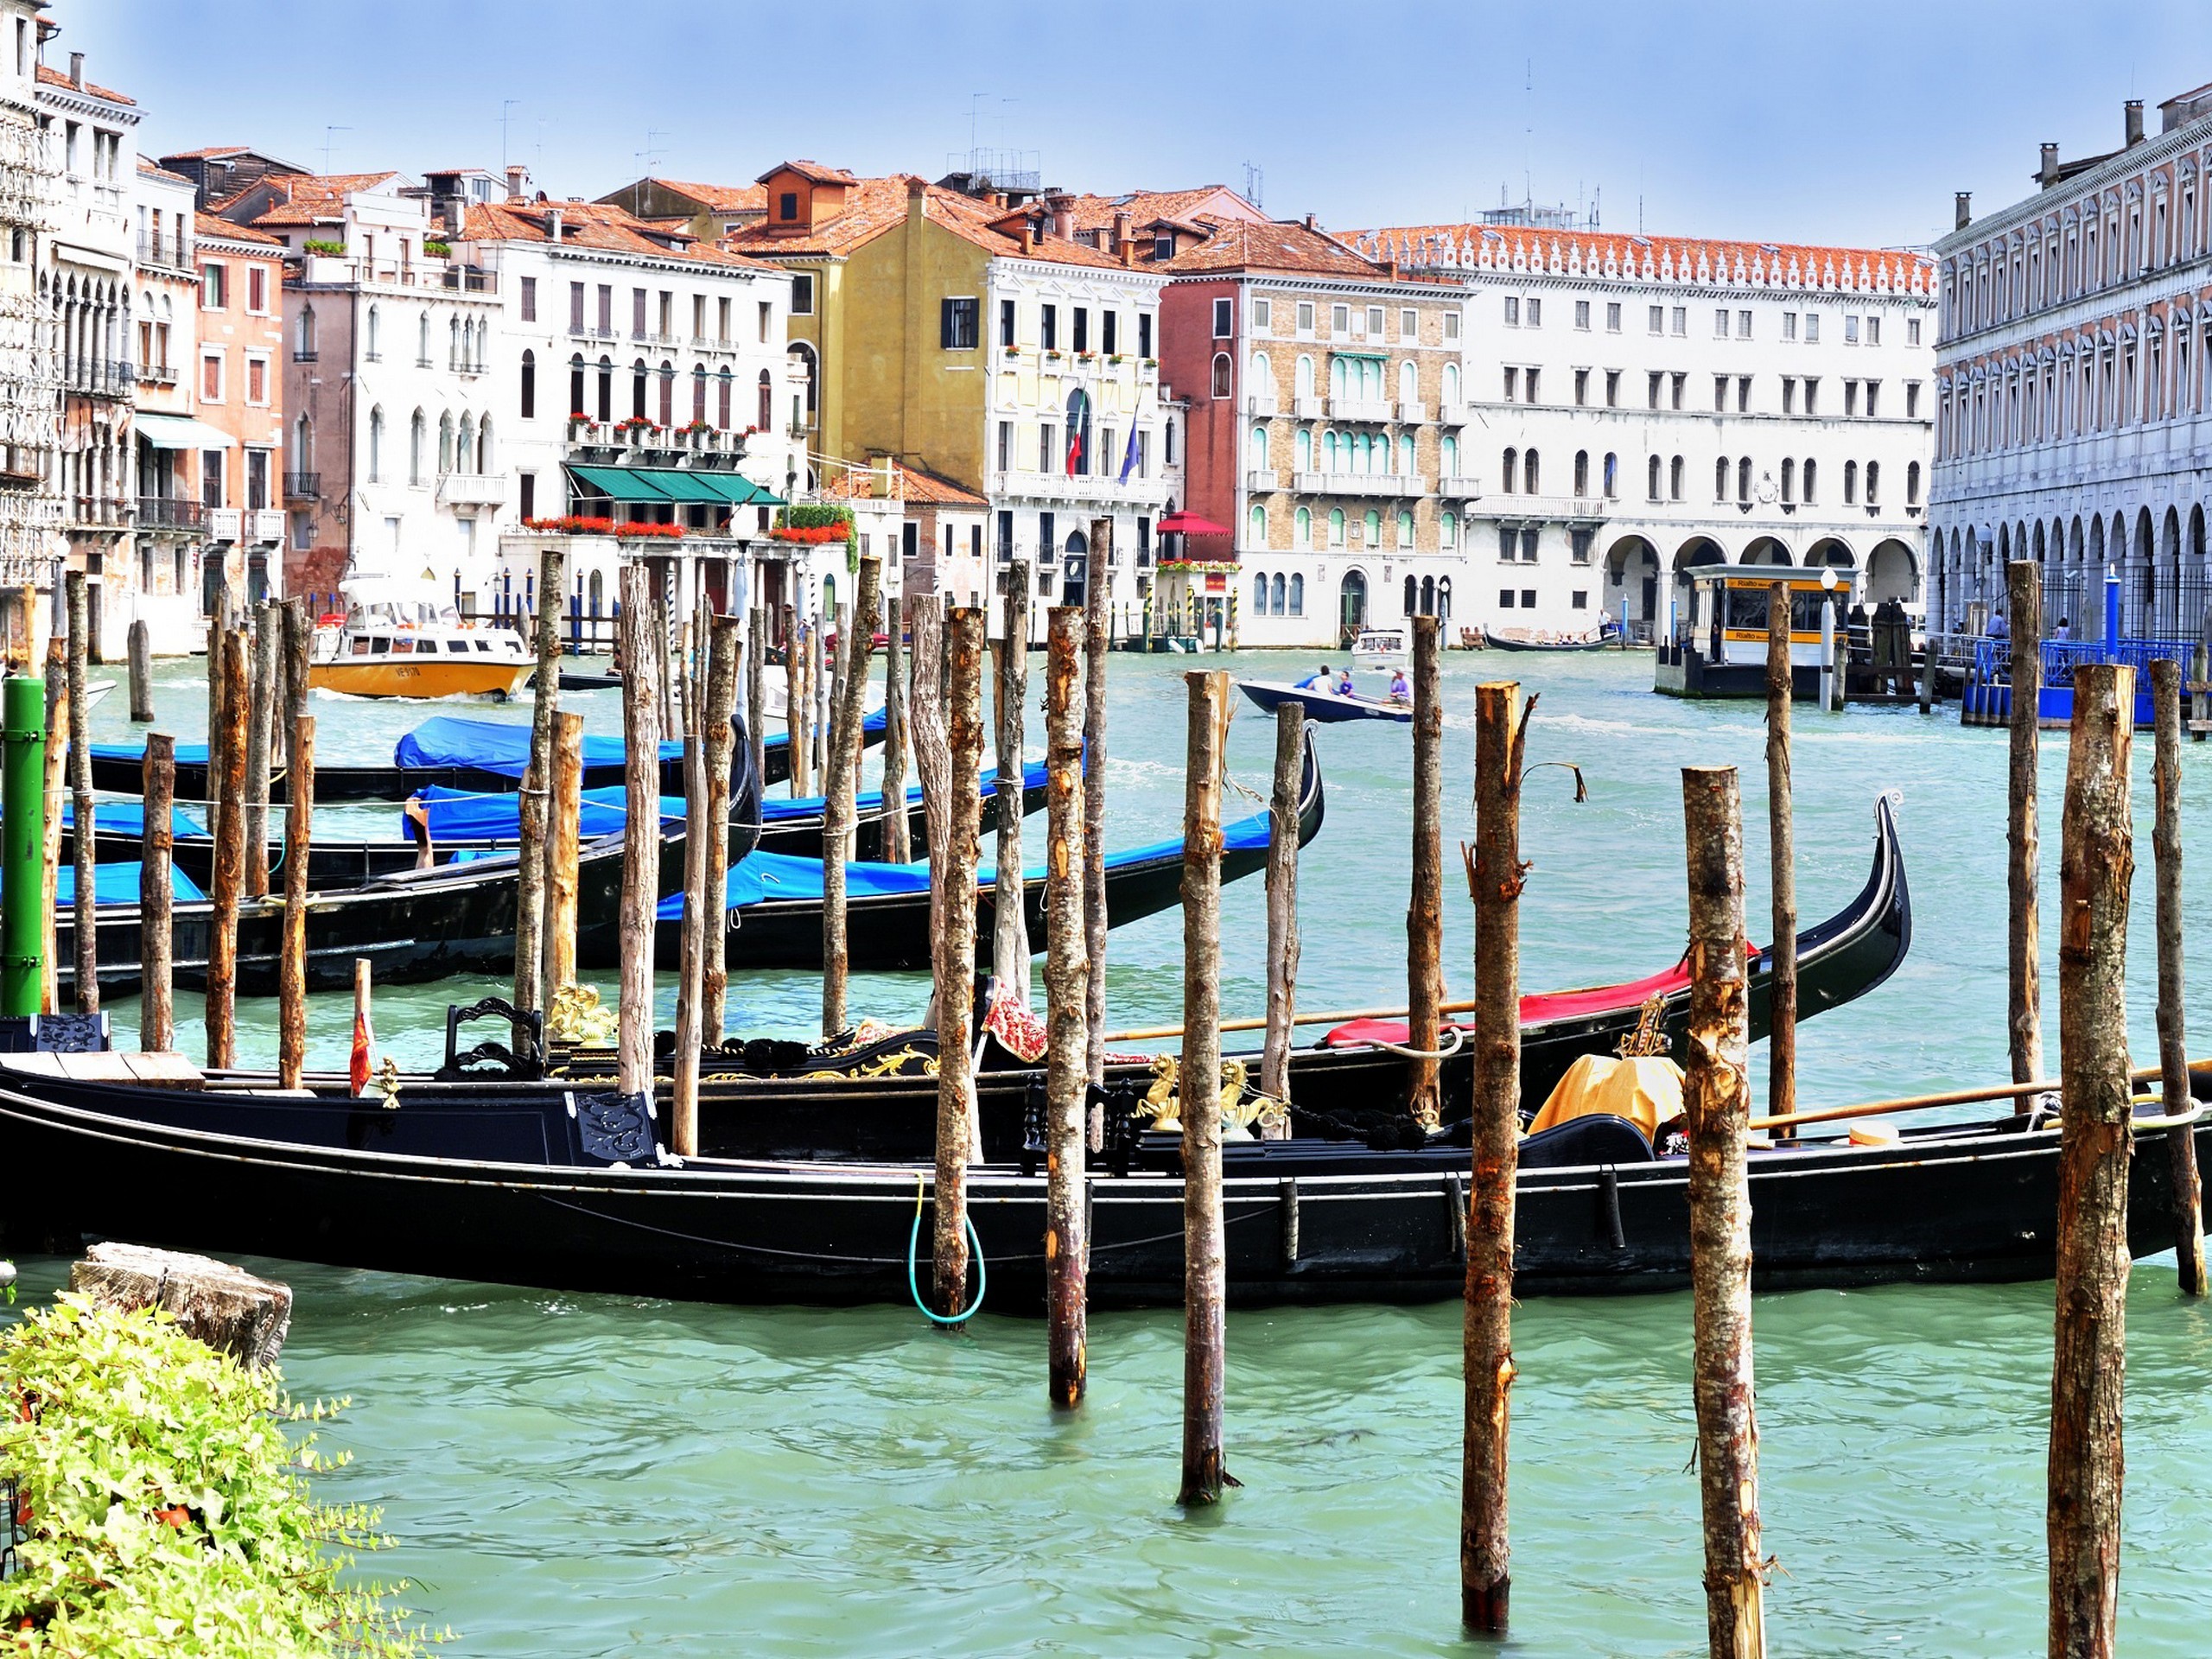 Wide channel and small marina in Venice